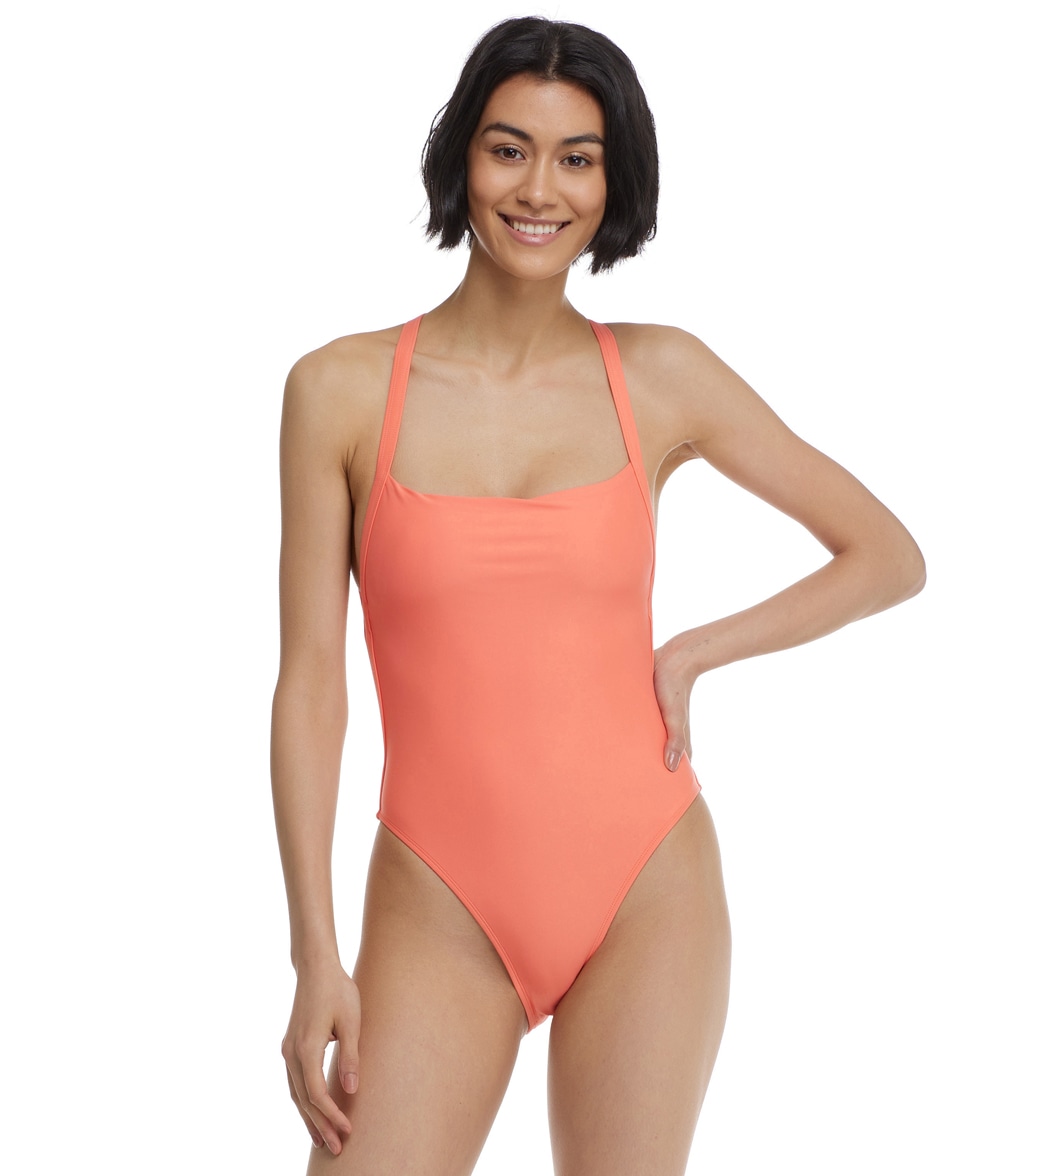 Body Glove Smoothies Electra One Piece Swimsuit - Sunset Medium - Swimoutlet.com